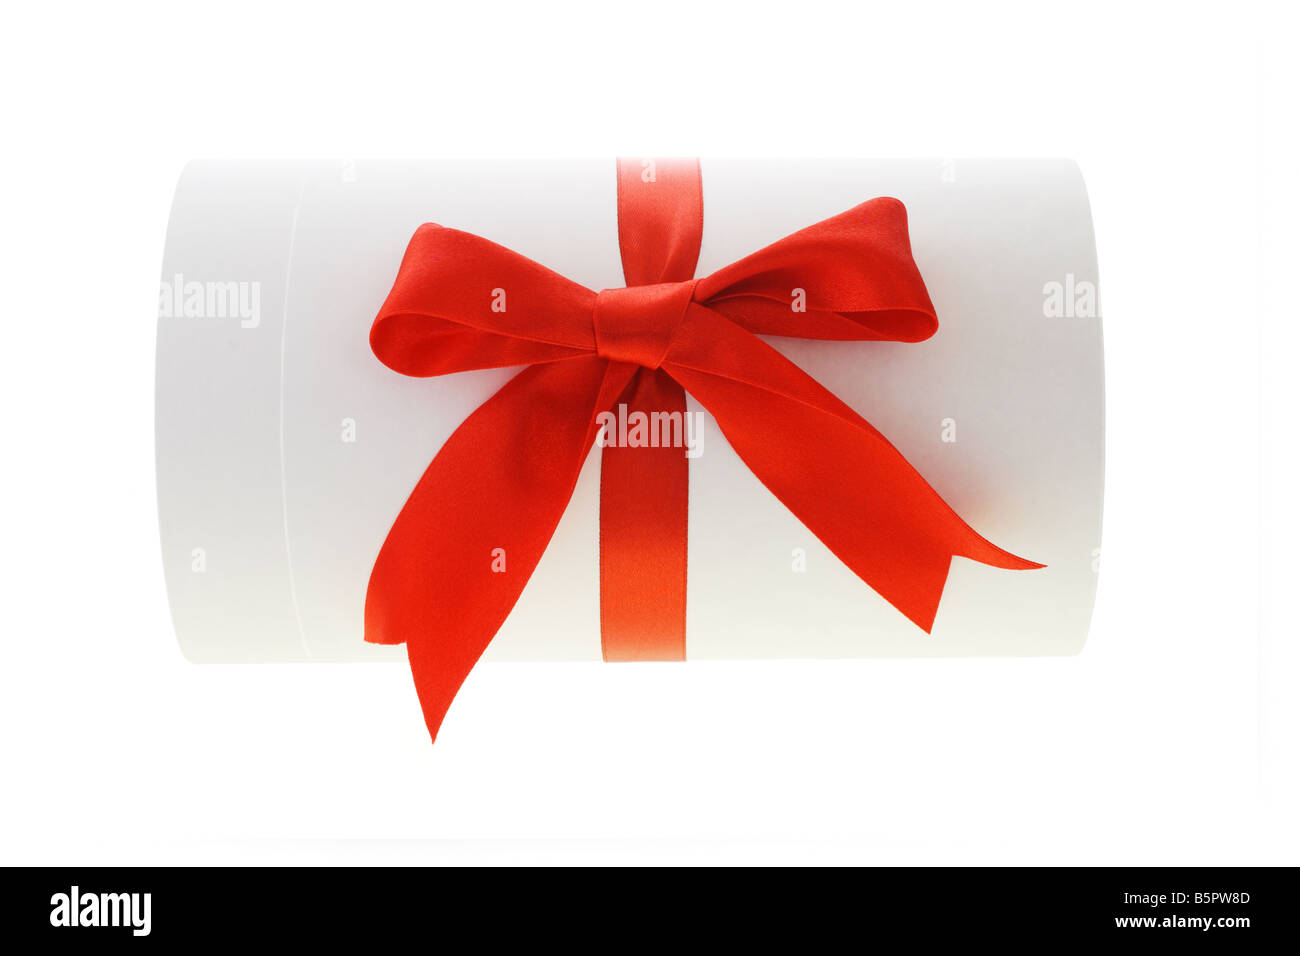 Blank cylindrical shape gift box with red bow ribbon Stock Photo